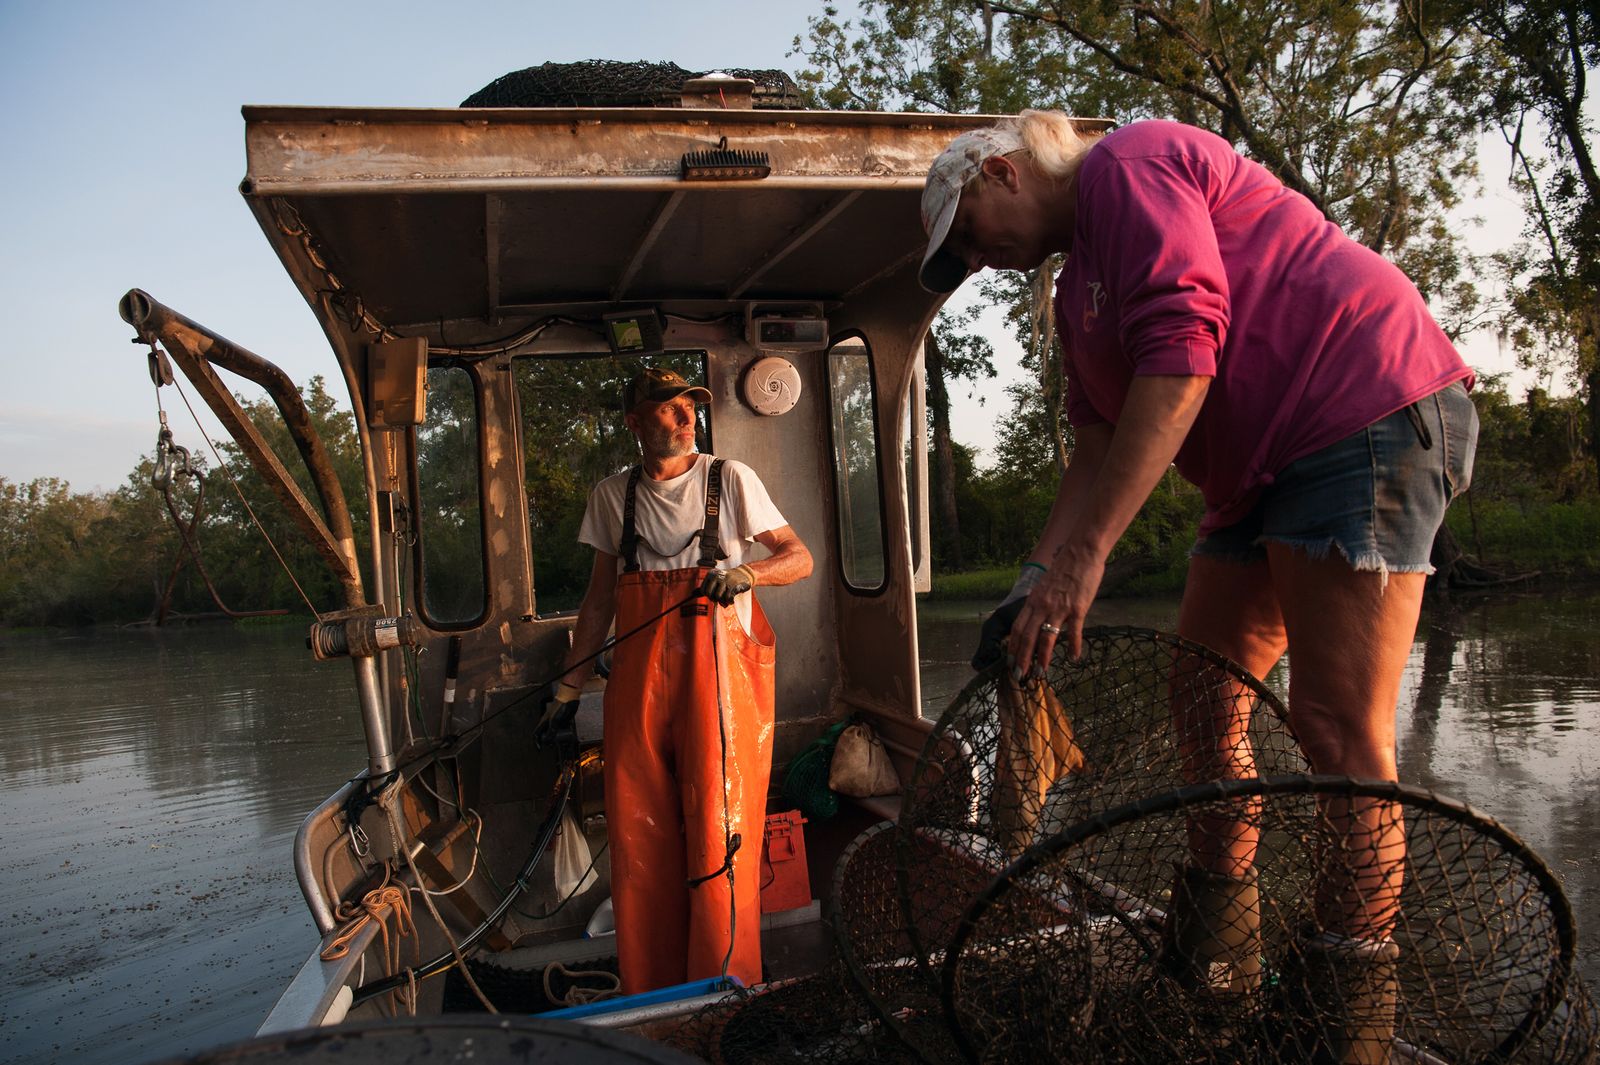 © Rory Doyle - Quentin (left) and Jamie Morales hoop net for catfish in Bayou Sorrel, Louisiana, USA.